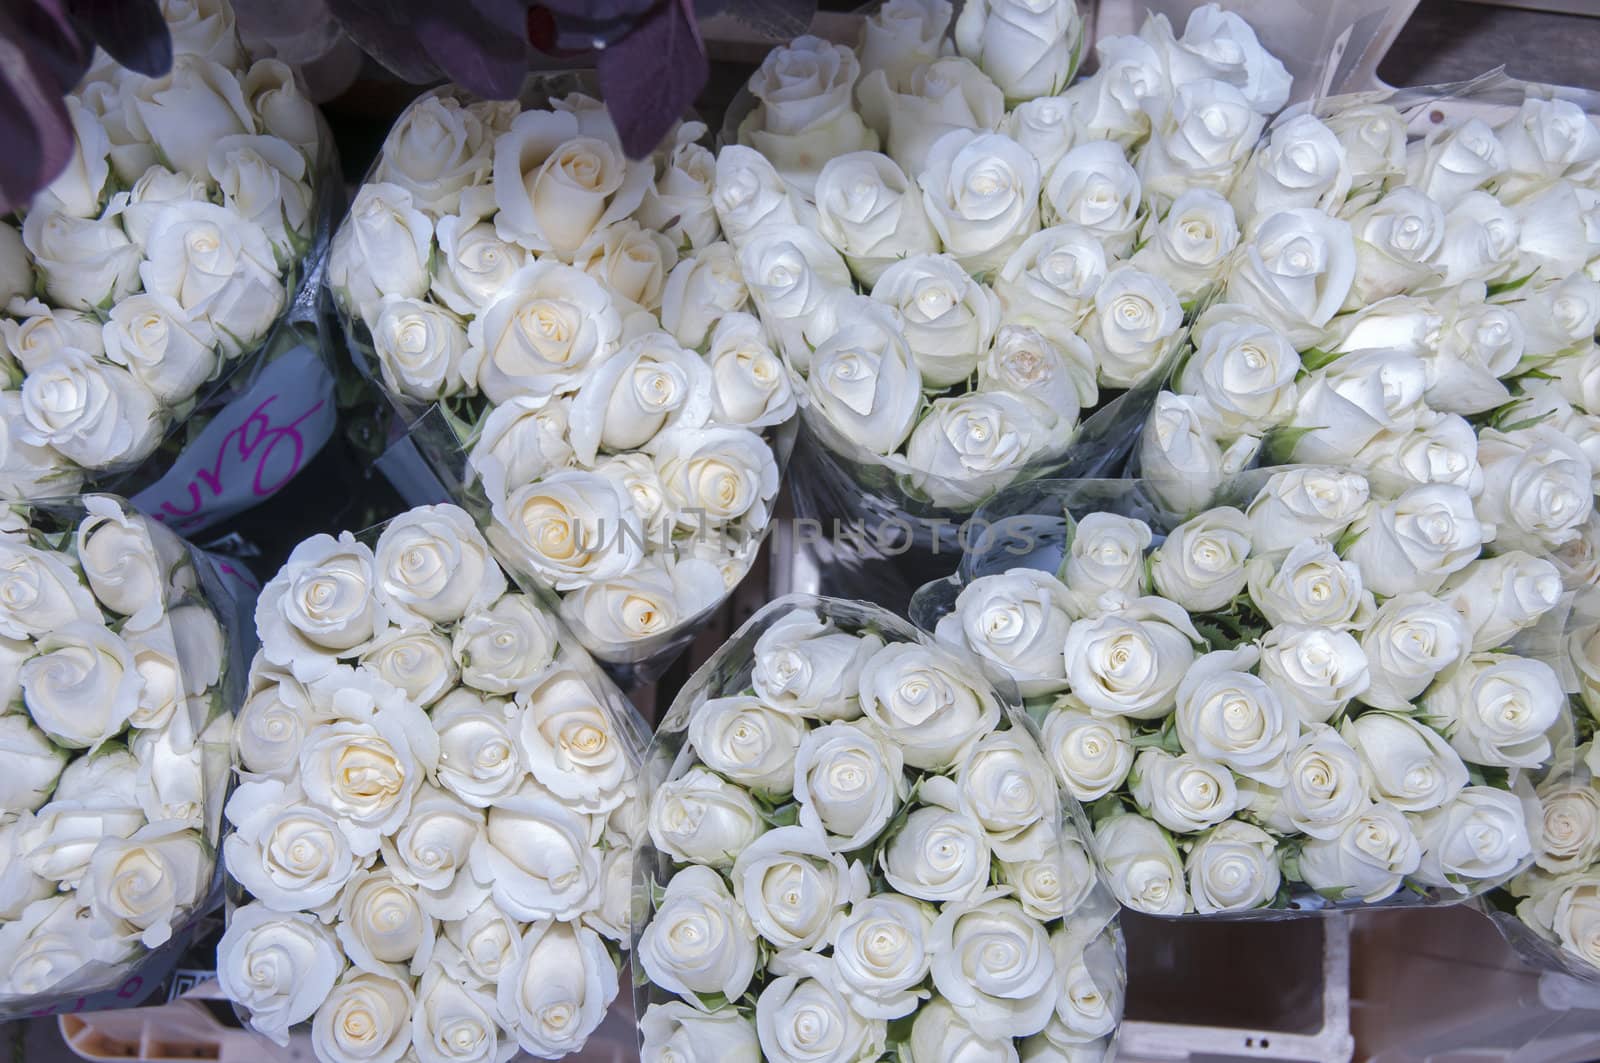 white roses by compuinfoto